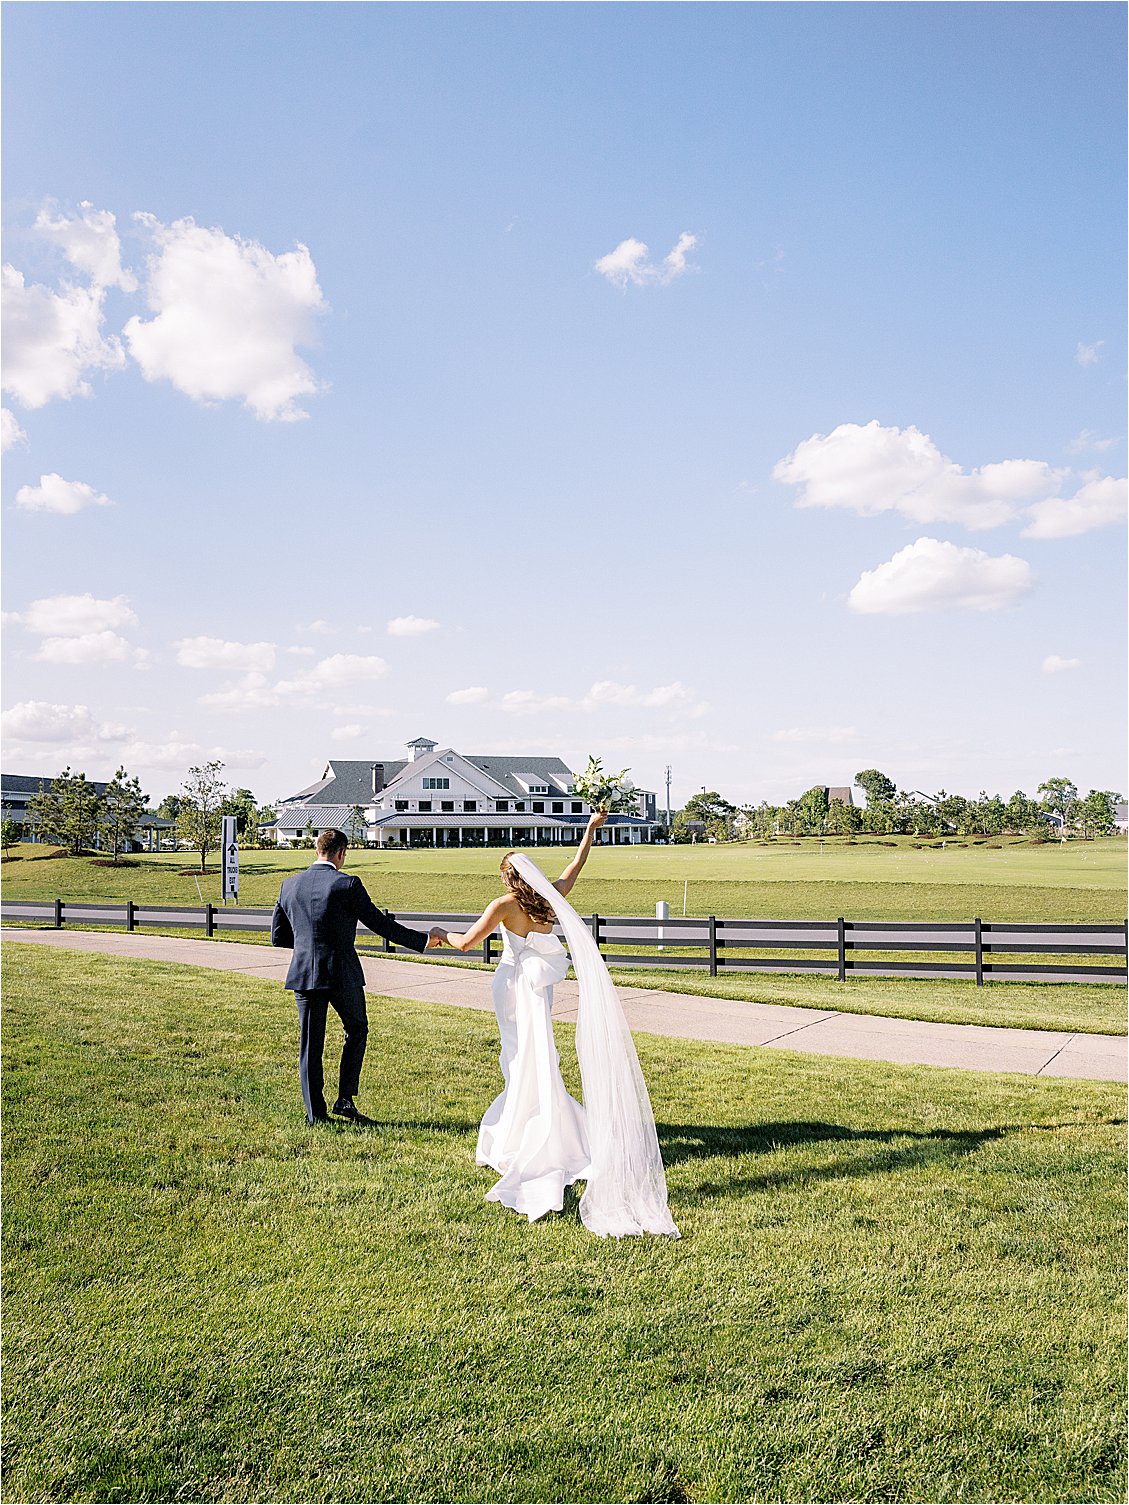 Just married at Bayside Resort and Golf Club